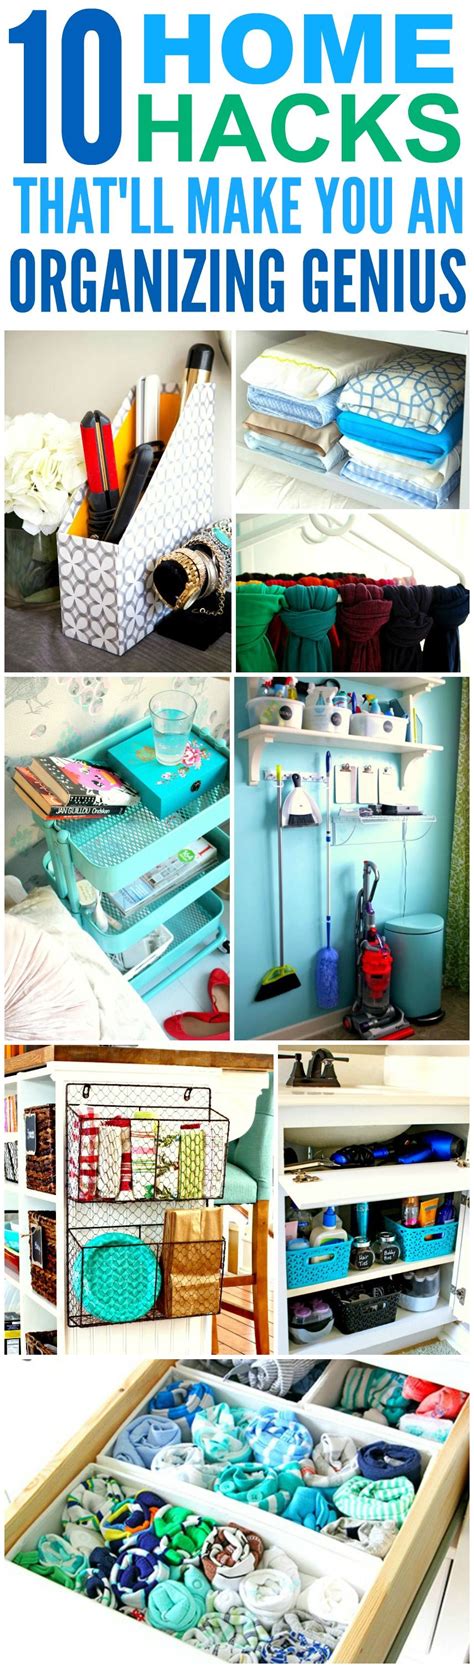 These 10 Home Hacks Thatll Made You An Organization Genius Are The